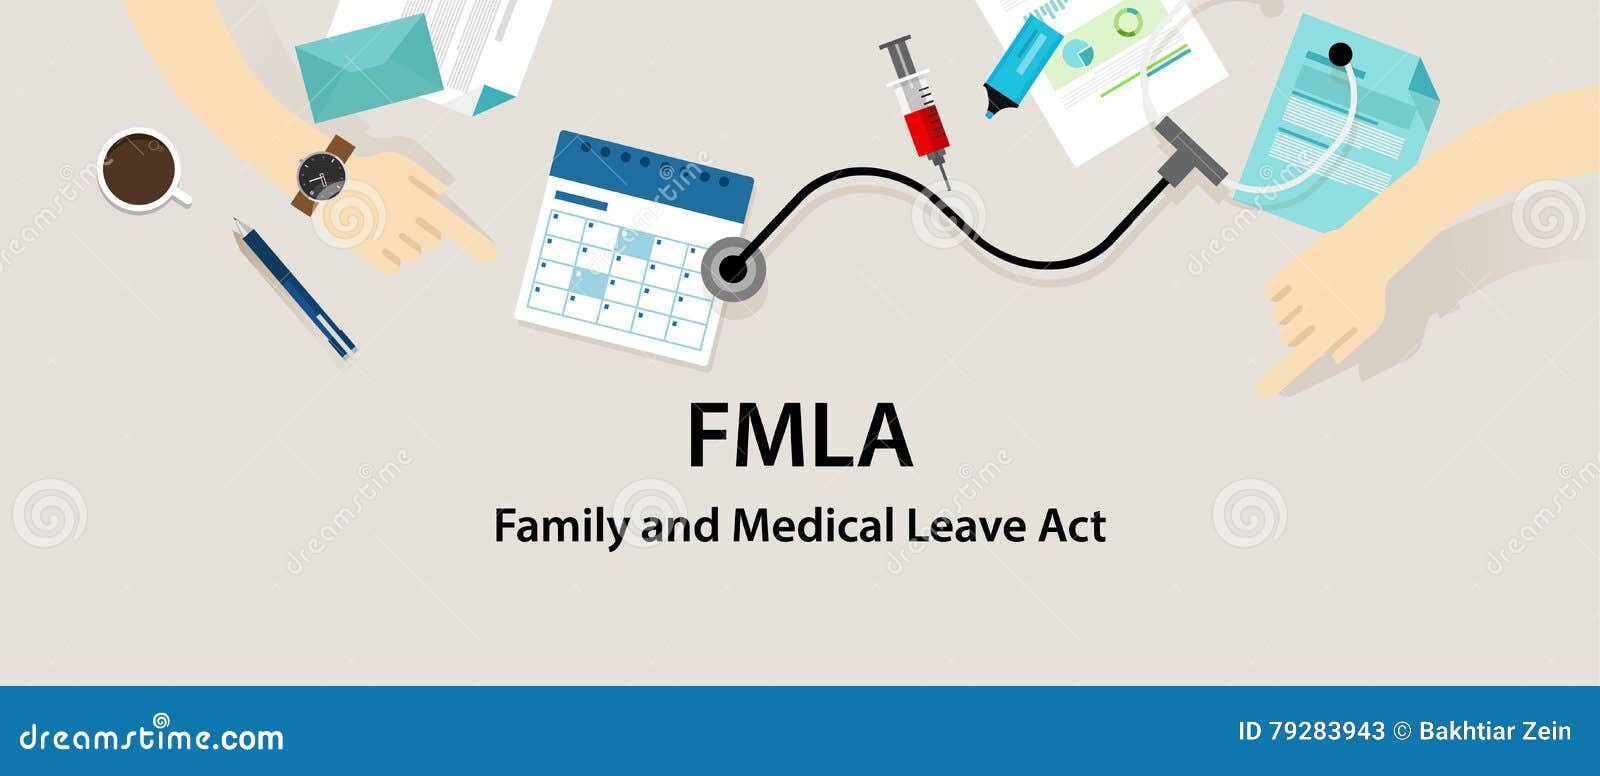 fmla family and medical leave act